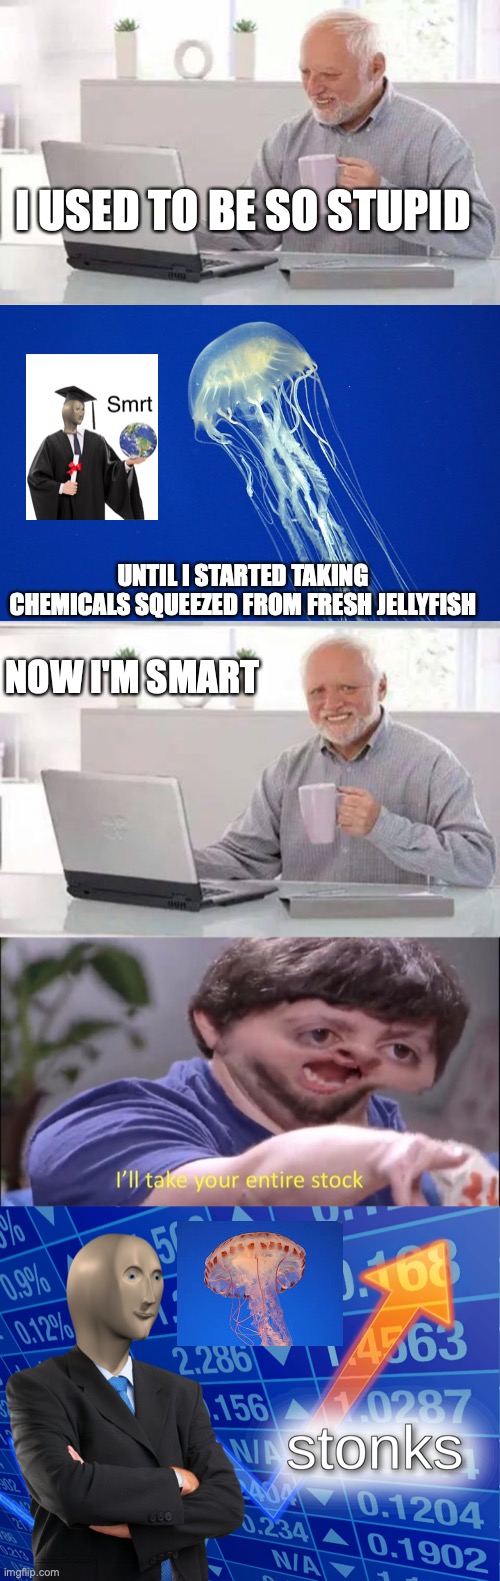 I USED TO BE SO STUPID; UNTIL I STARTED TAKING CHEMICALS SQUEEZED FROM FRESH JELLYFISH; NOW I'M SMART | image tagged in memes,hide the pain harold,i'll take your entire stock,stonks | made w/ Imgflip meme maker